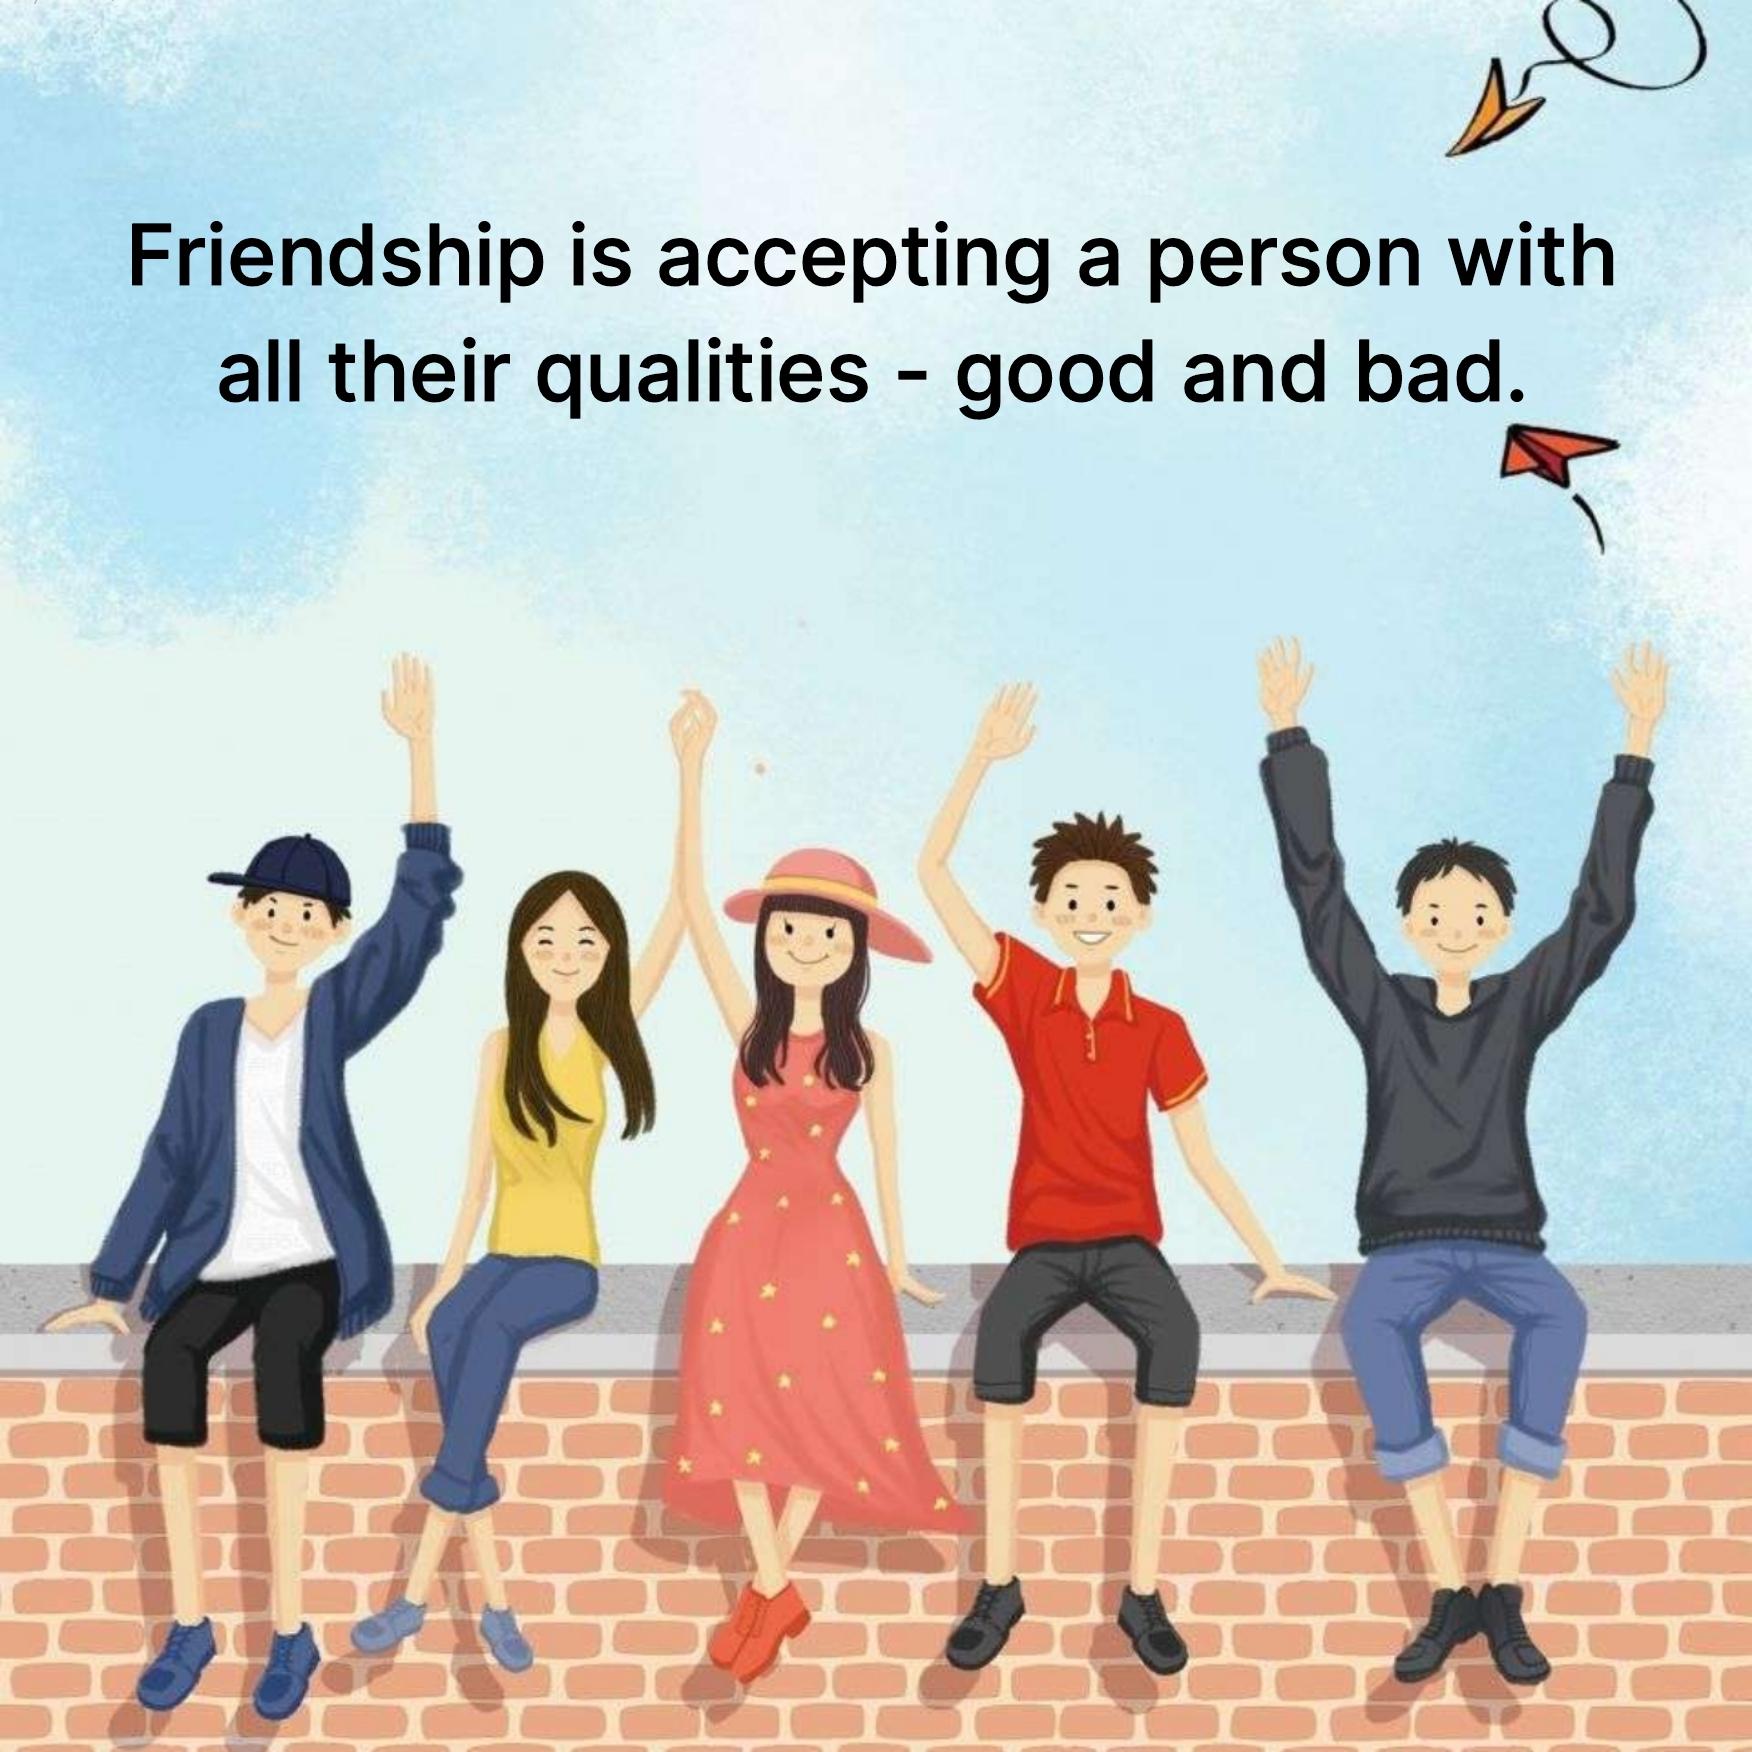 Friendship is accepting a person with all their qualities - good and bad